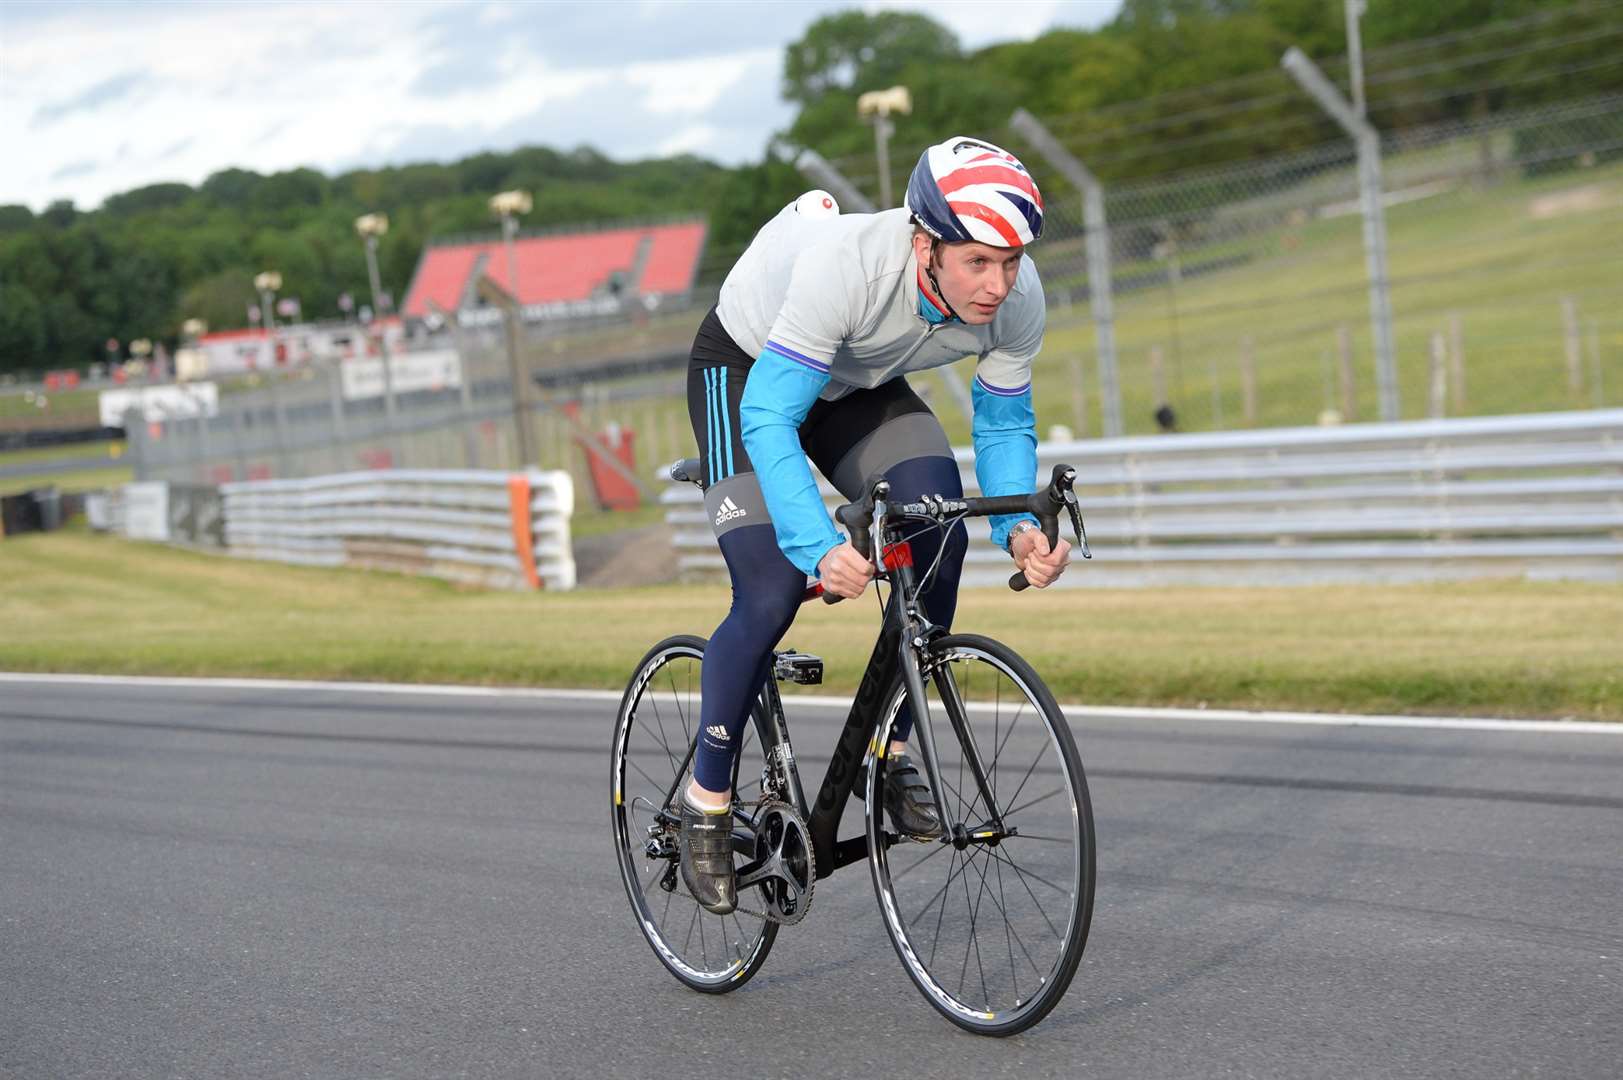 Olympic hero Jason Kenny will be at Brands Hatch for the Revolve24 event next month